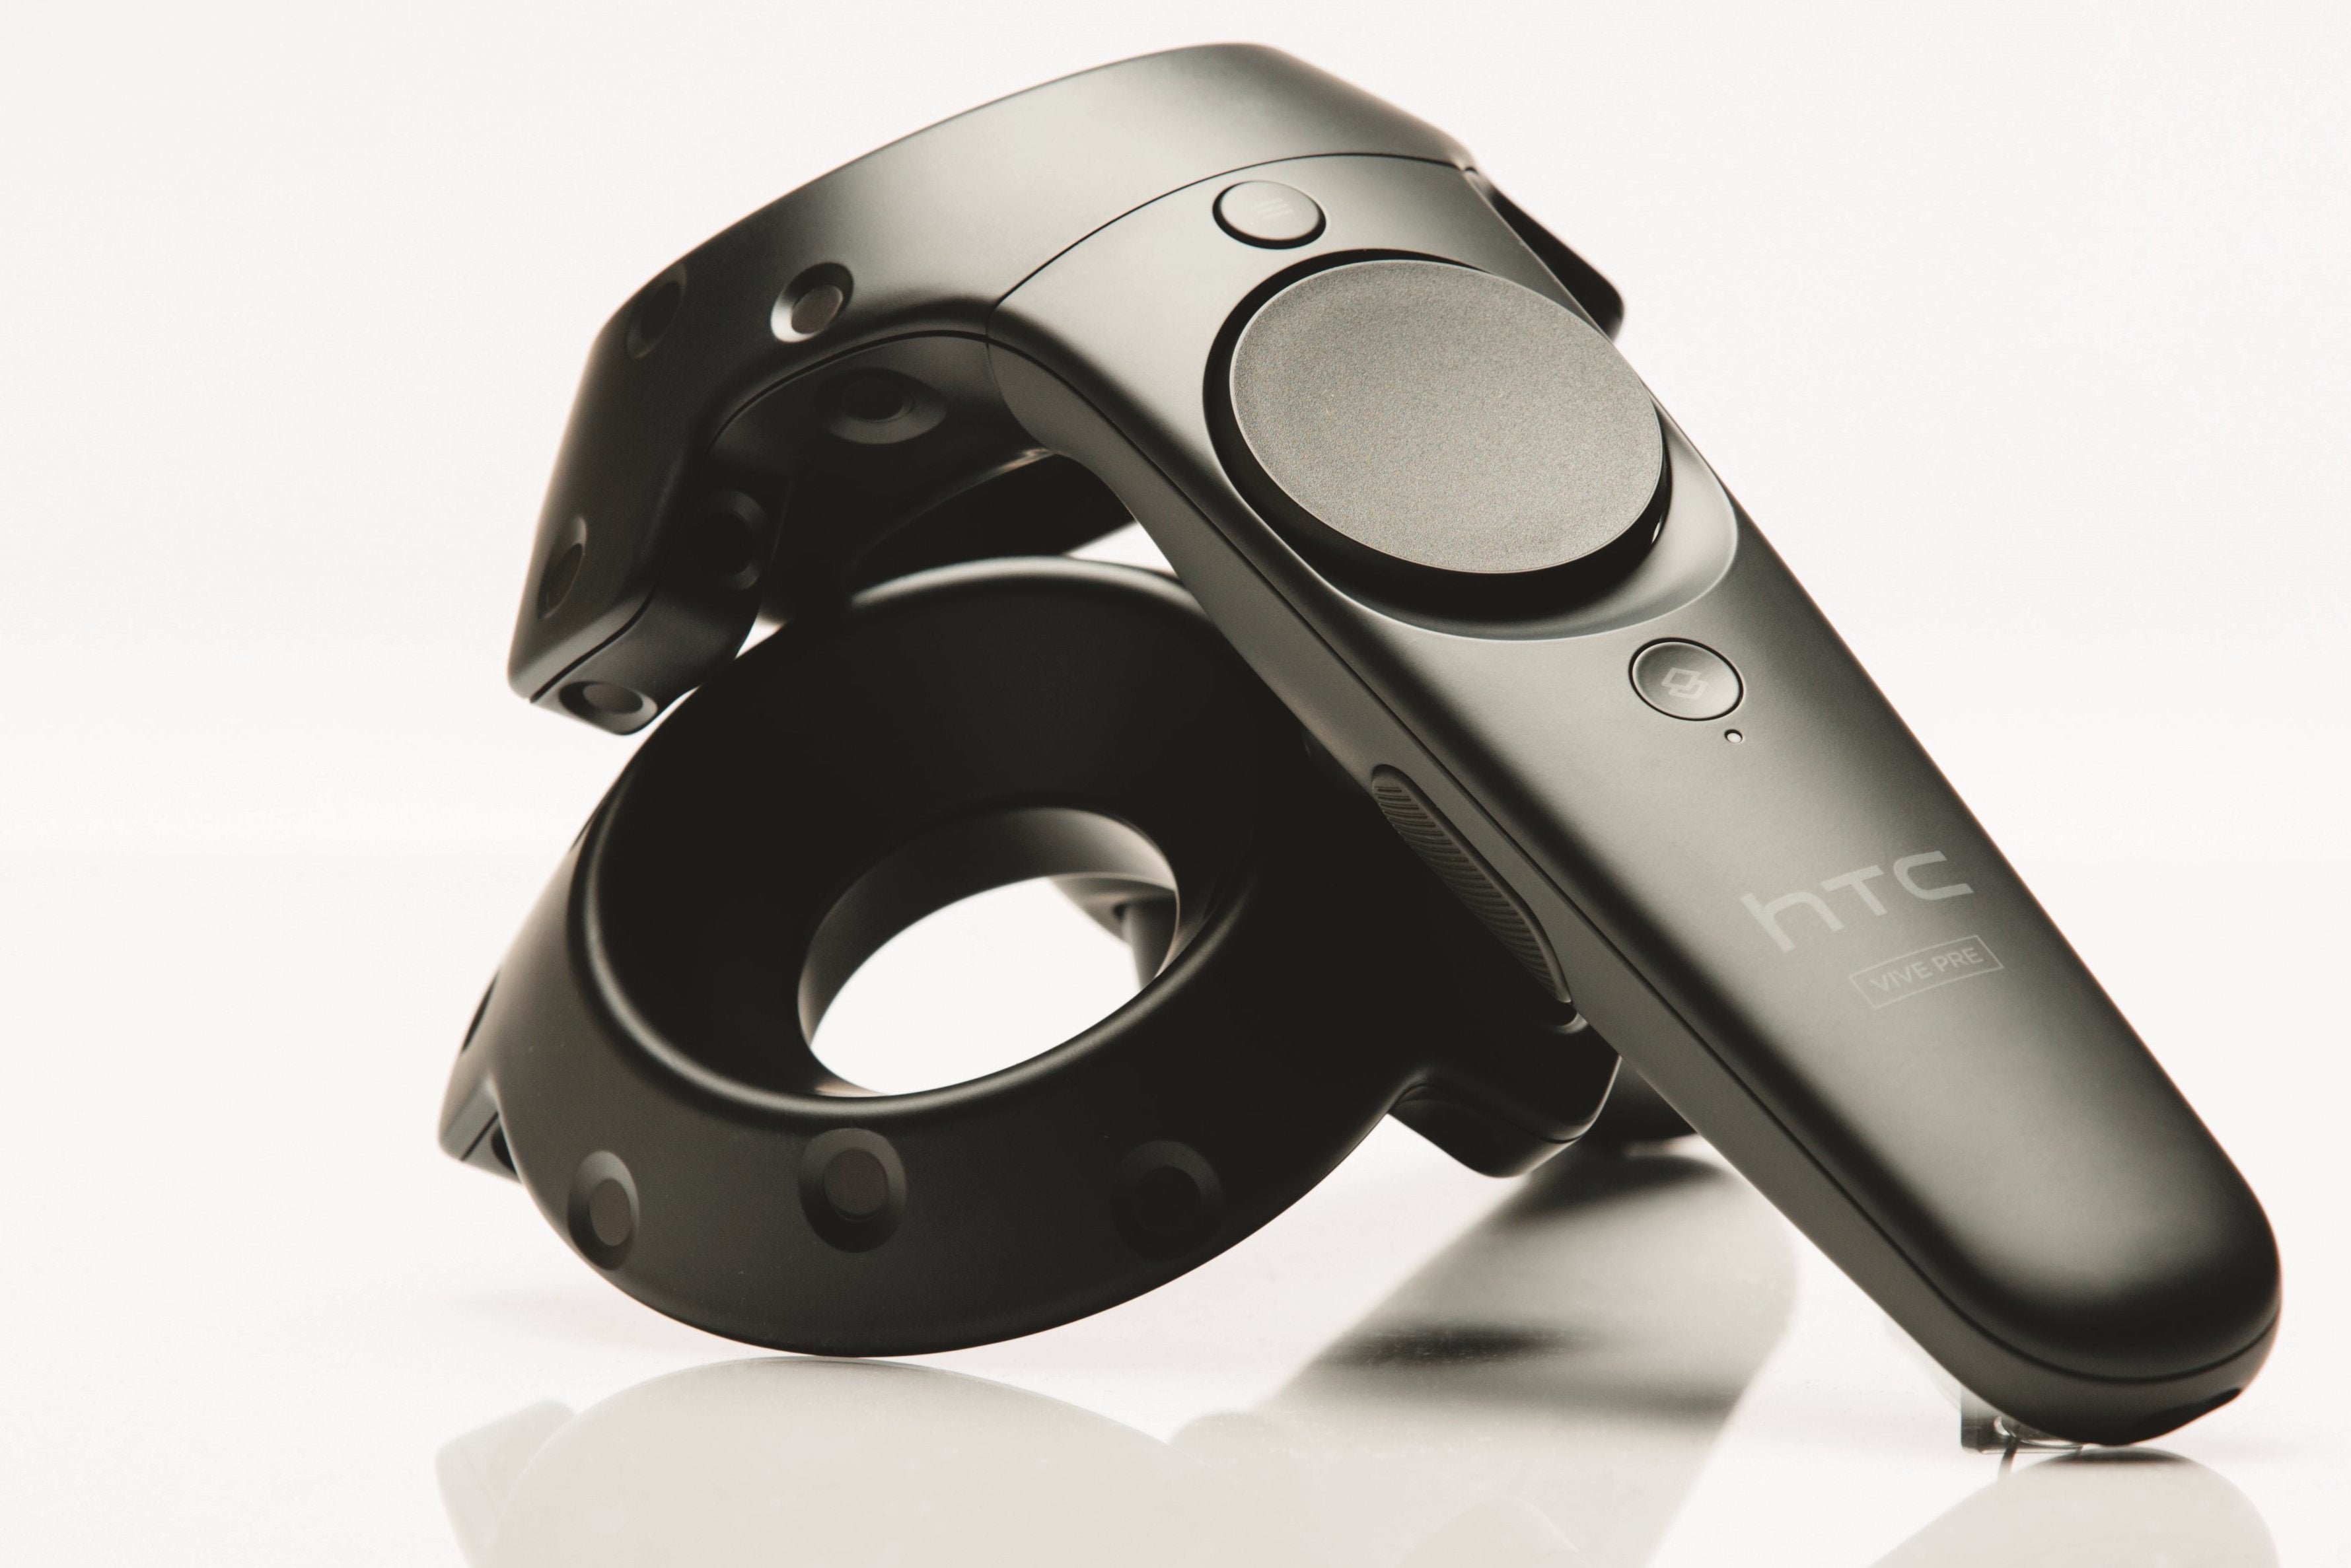 Image for Vive preorders open Feb 29, HTC confirms